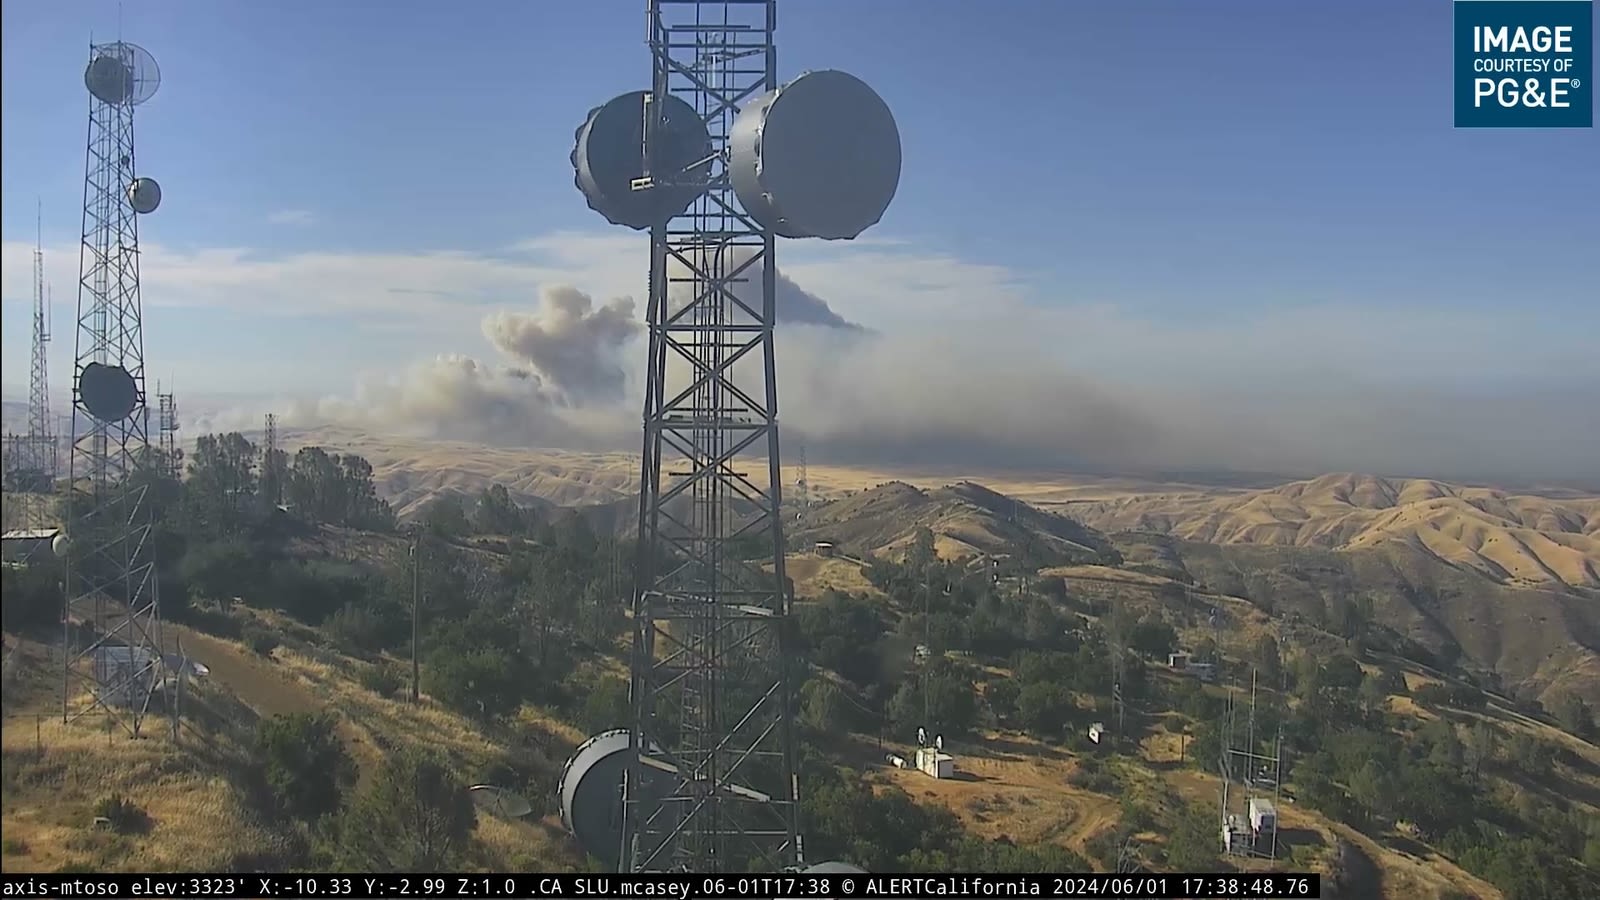 946-acre brush fire burning near Lawrence Livermore Lab; 40% contained, CAL FIRE says